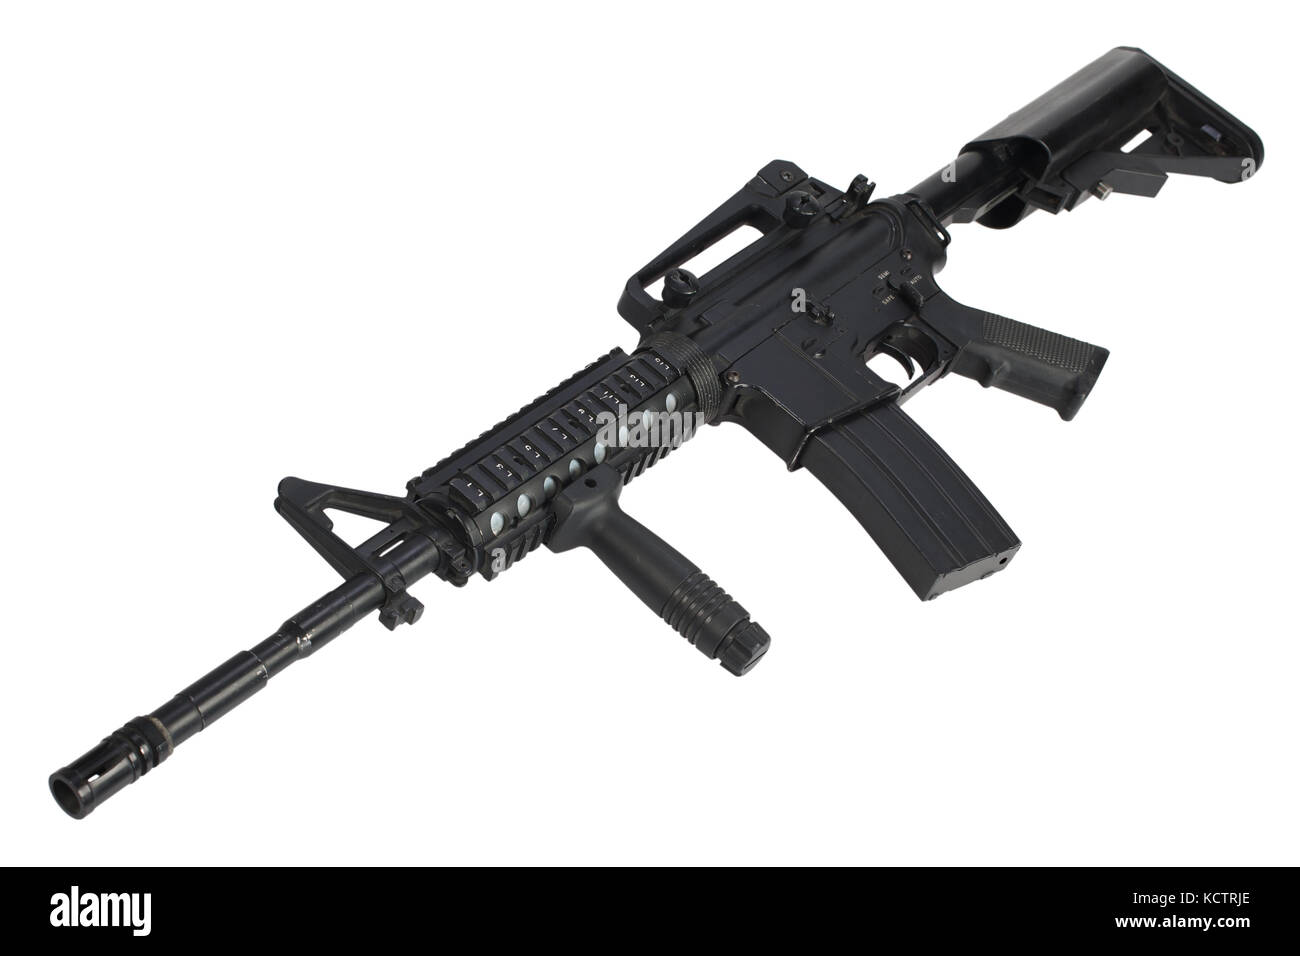 M4 assault rifle isolated on a white background Stock Photo